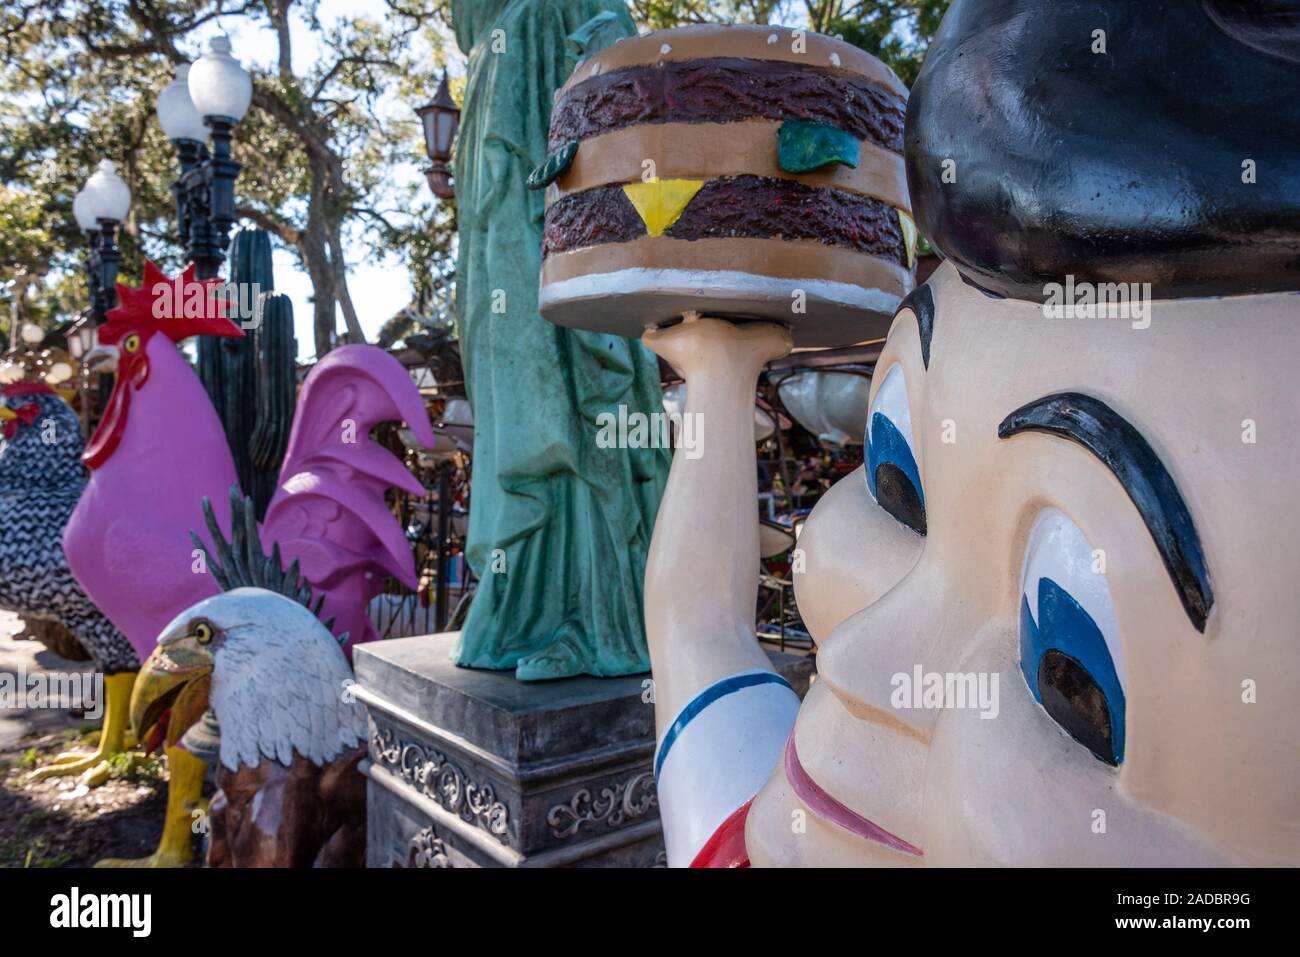 Shoney's Big Boy stands alongside the Statue of Liberty and various large painted metal statues at Barberville Yard Art Emporium in Pierson, Florida. Stock Photo